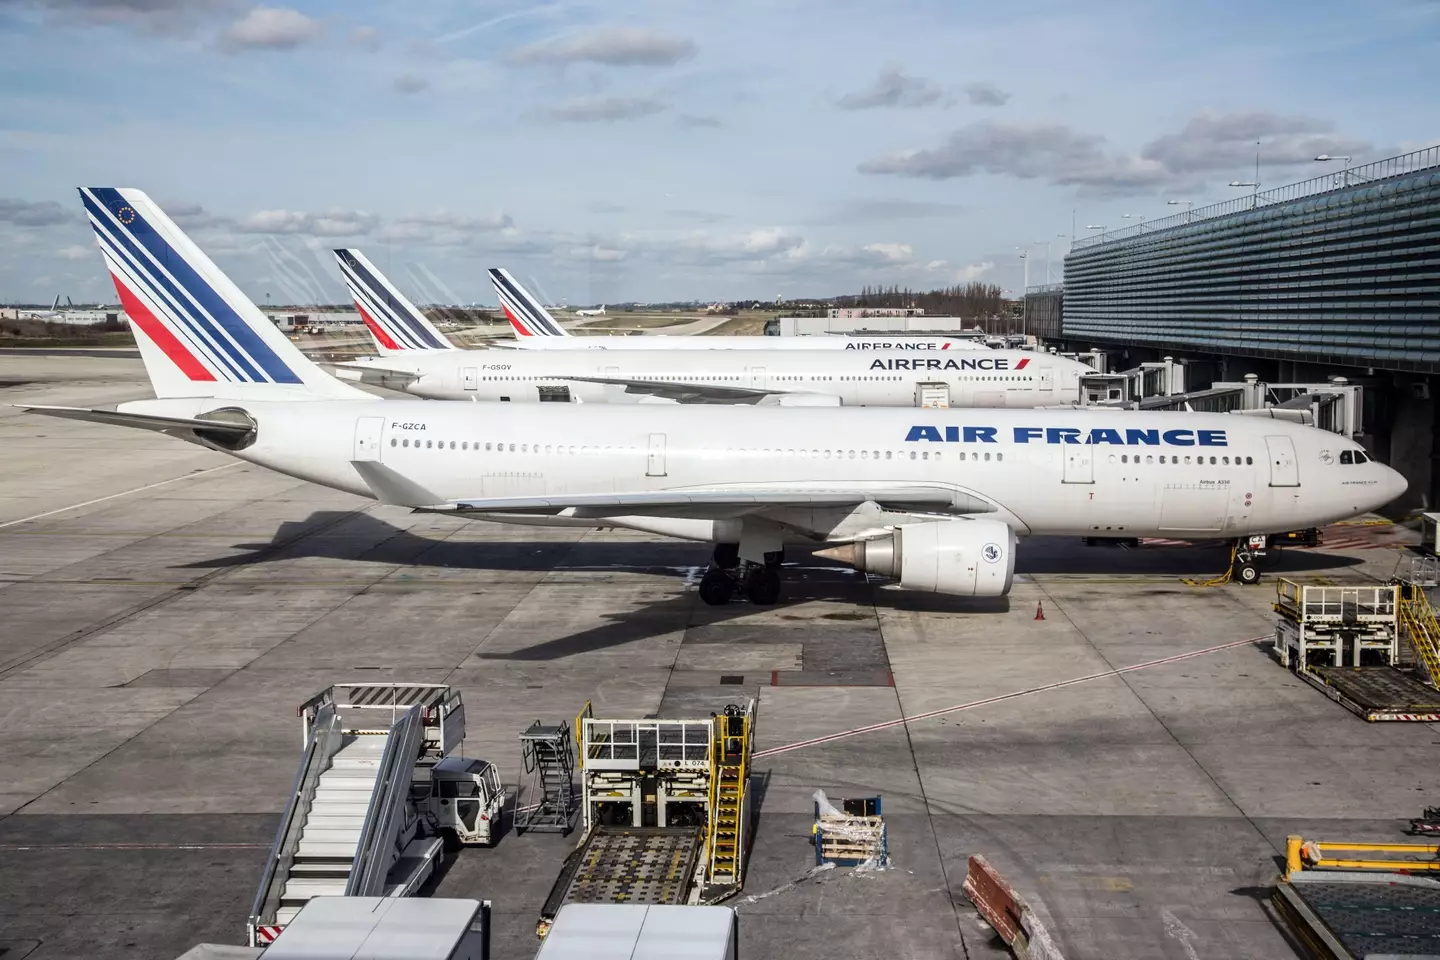 A pair of Air France pilots had a punch up in the cockpit while their plane was mid-flight.